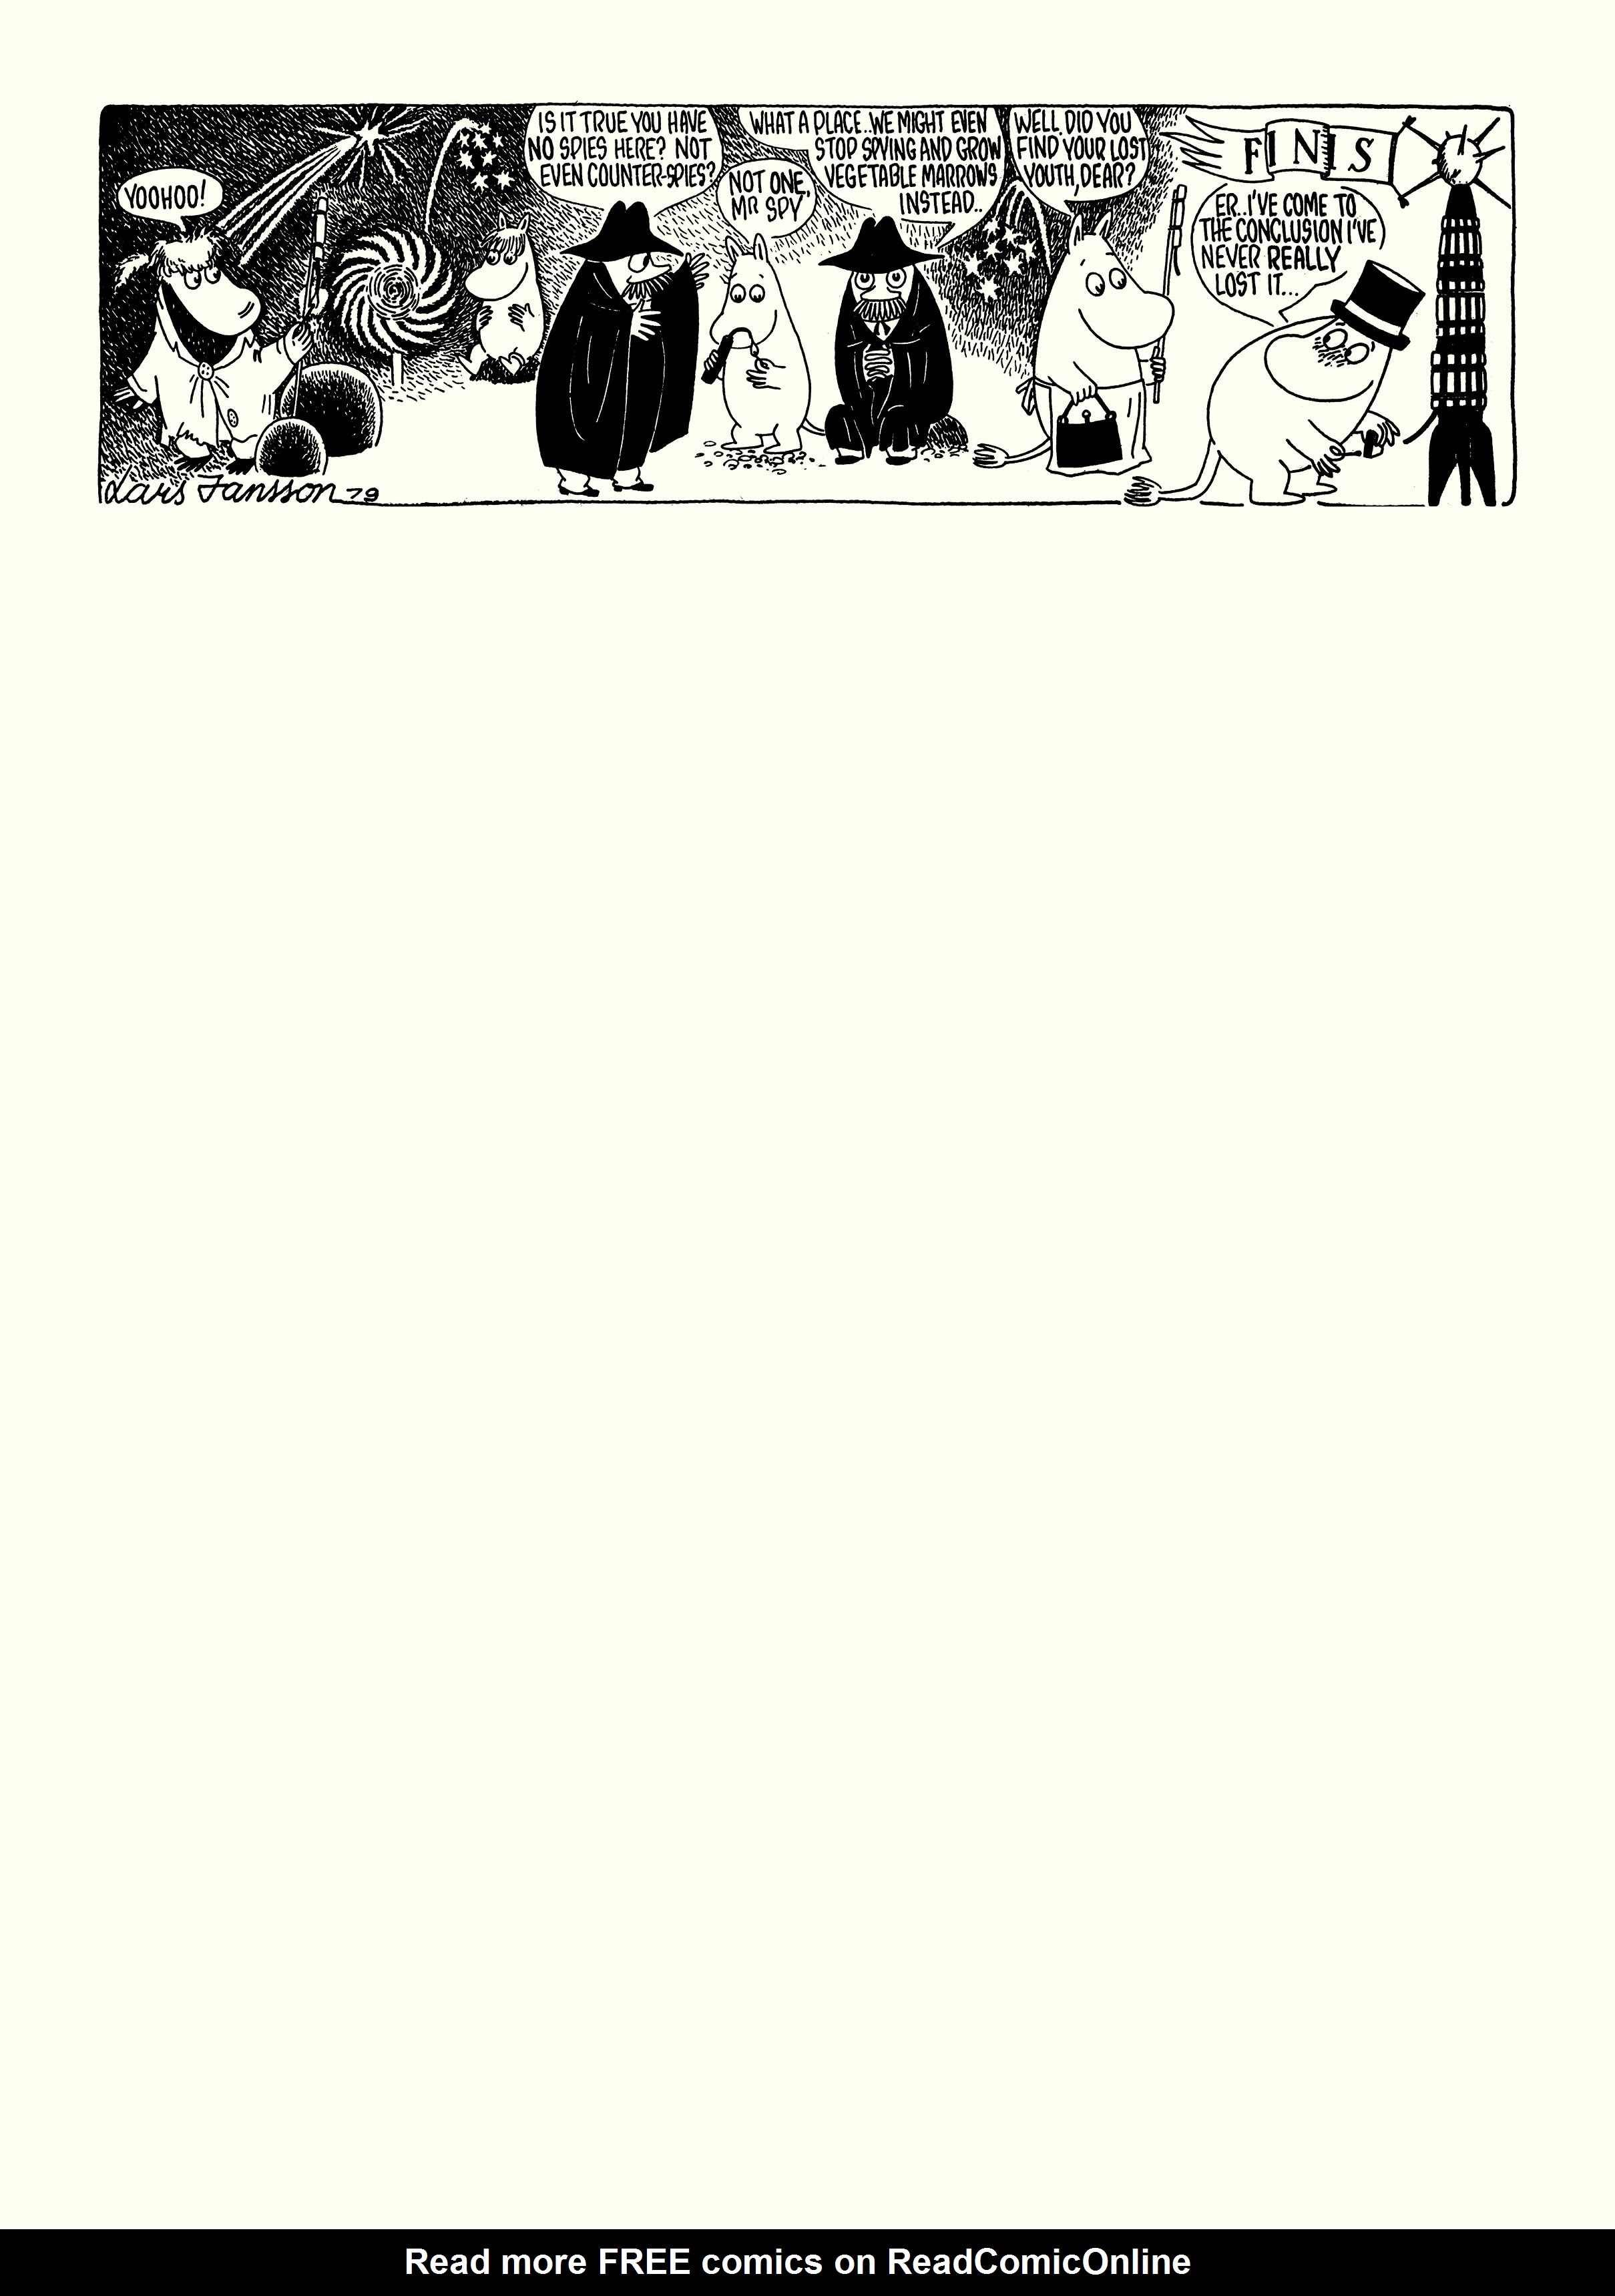 Read online Moomin: The Complete Lars Jansson Comic Strip comic -  Issue # TPB 6 - 67